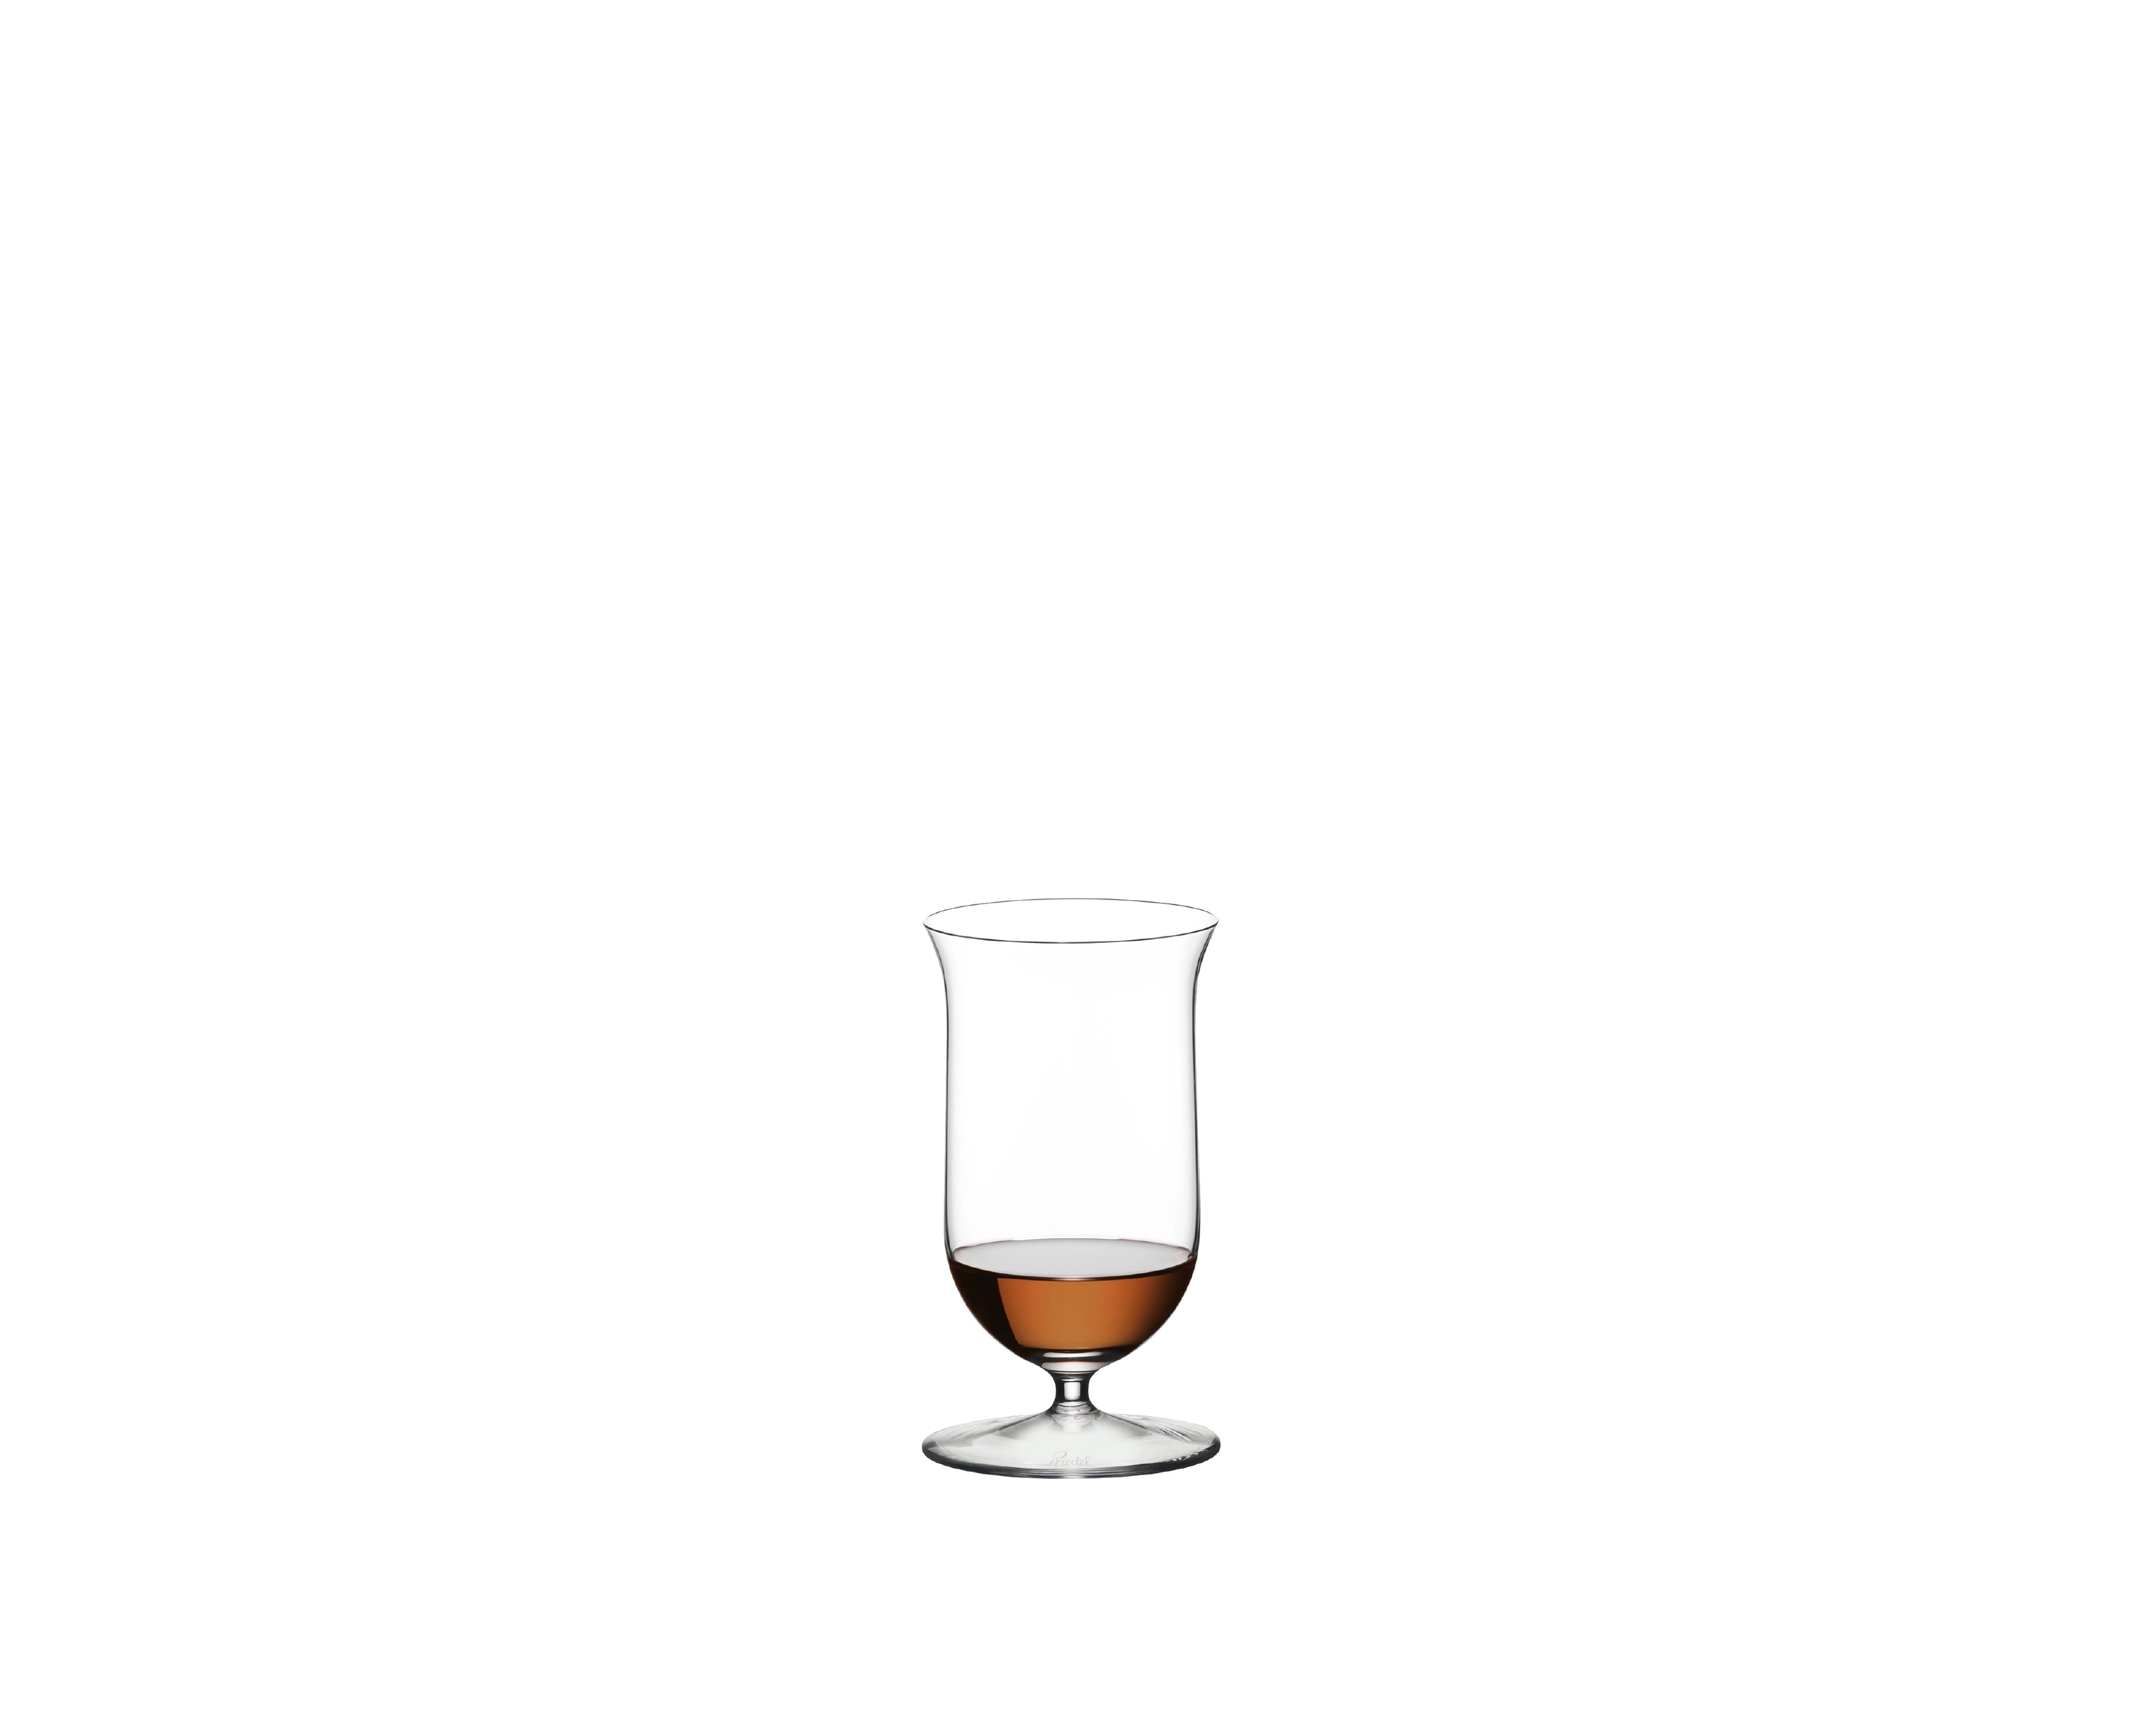 Riedel Sommeliers Single Malt Whiskey Glass, Set of 4 pieces